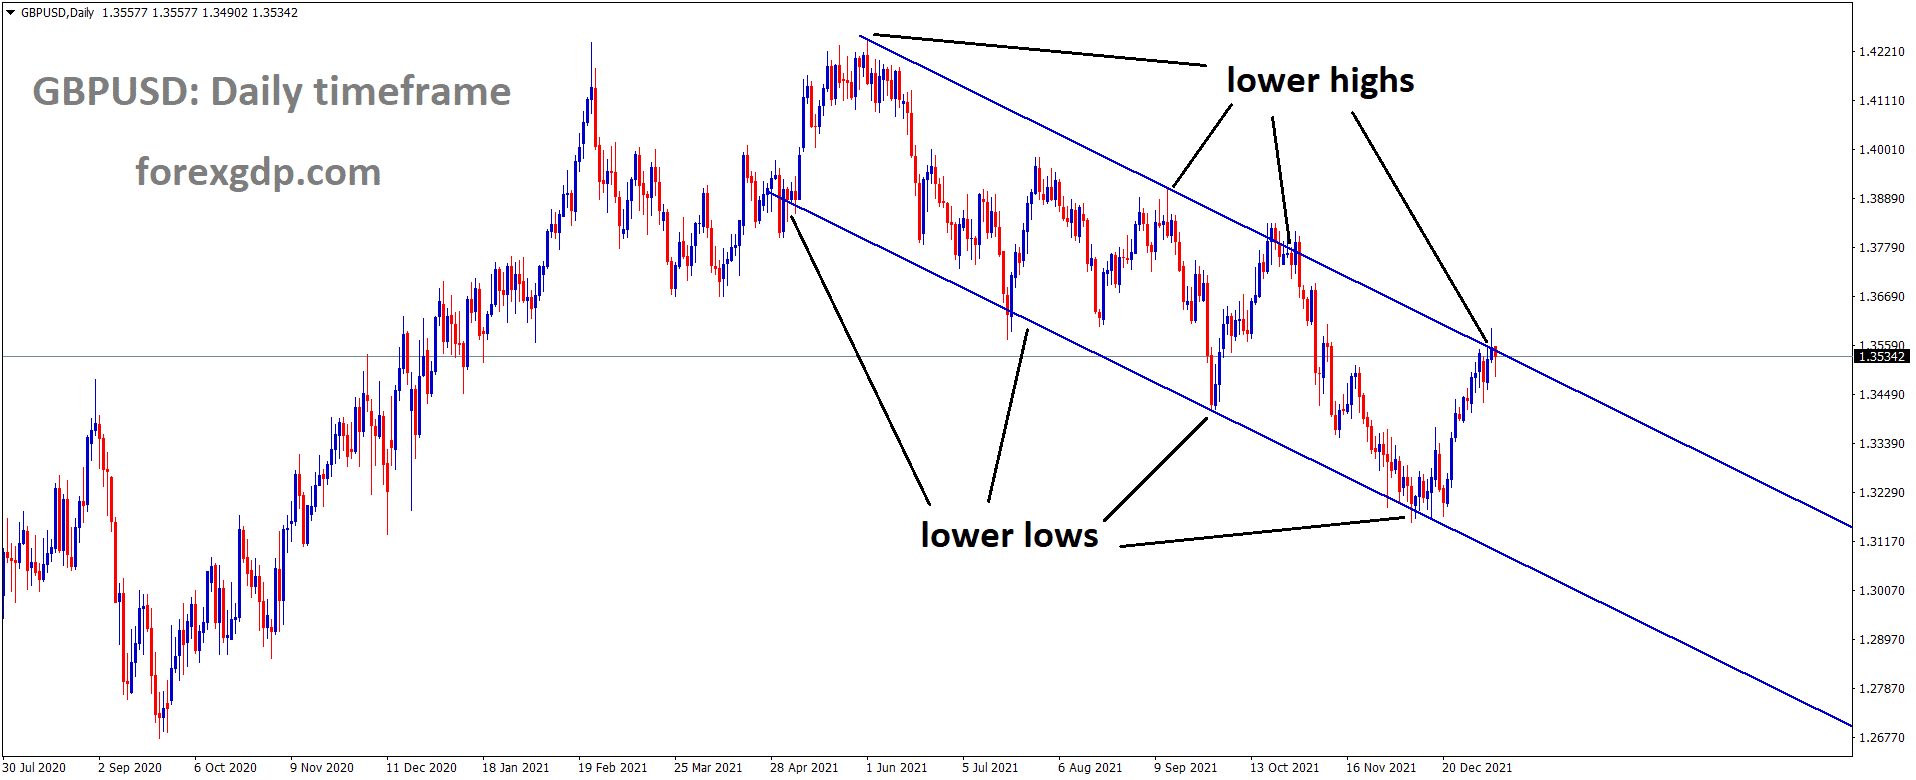 GBPUSD is moving in the Descending channel and the market has reached the lower high area of the channel 2